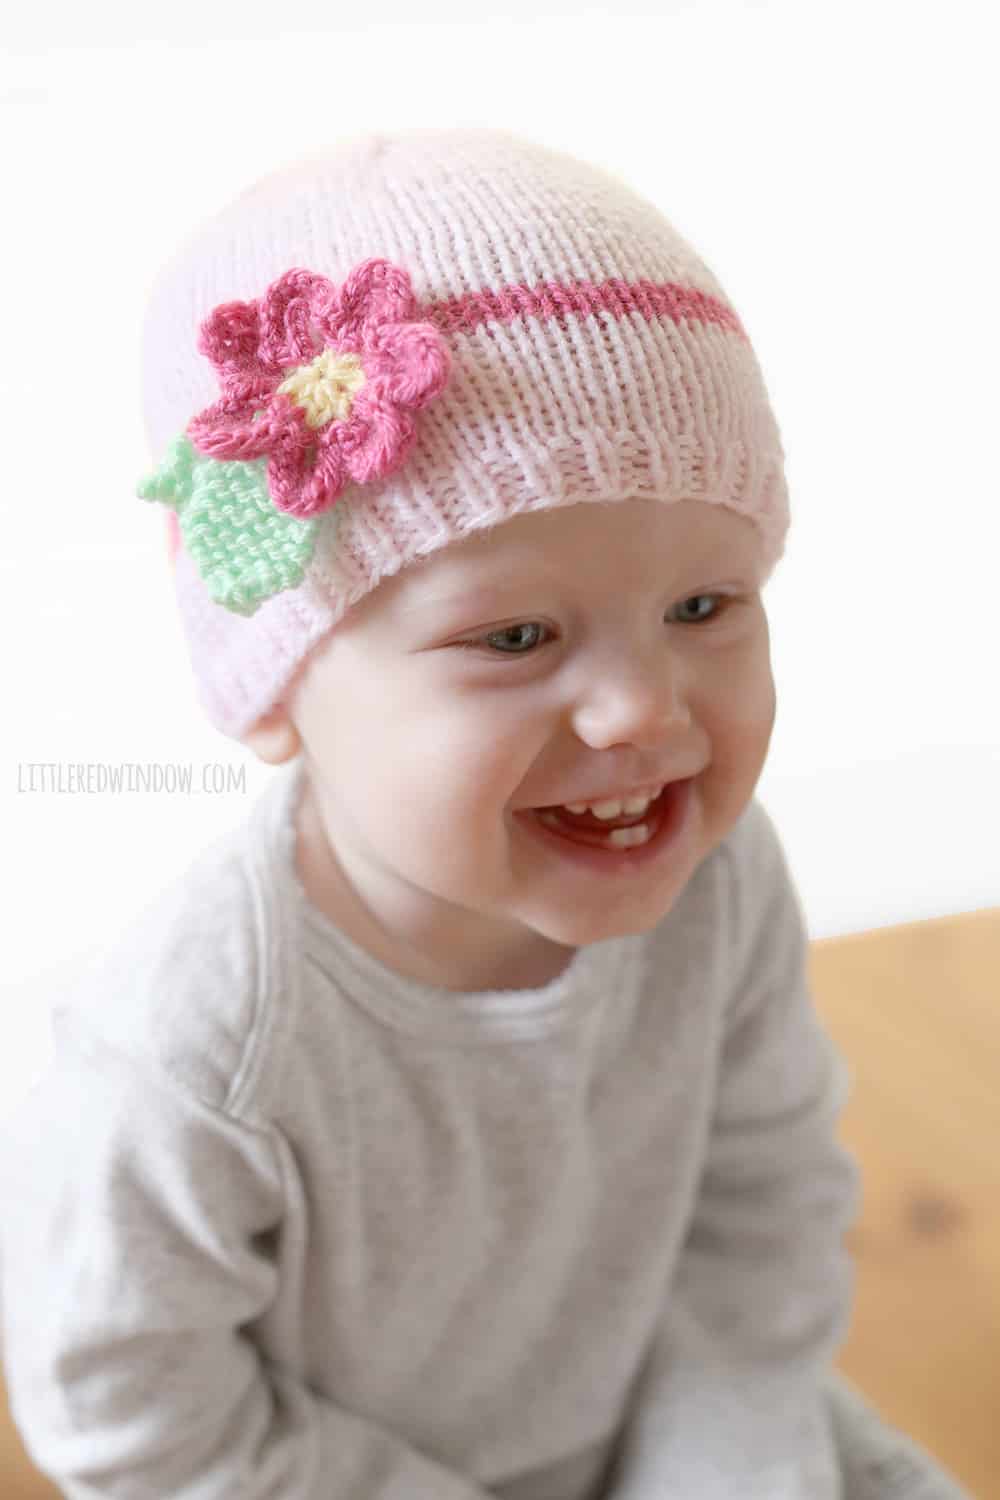 Spring Daisy Hat Knitting Pattern for newborns, babies and toddlers! | littleredwindow.com